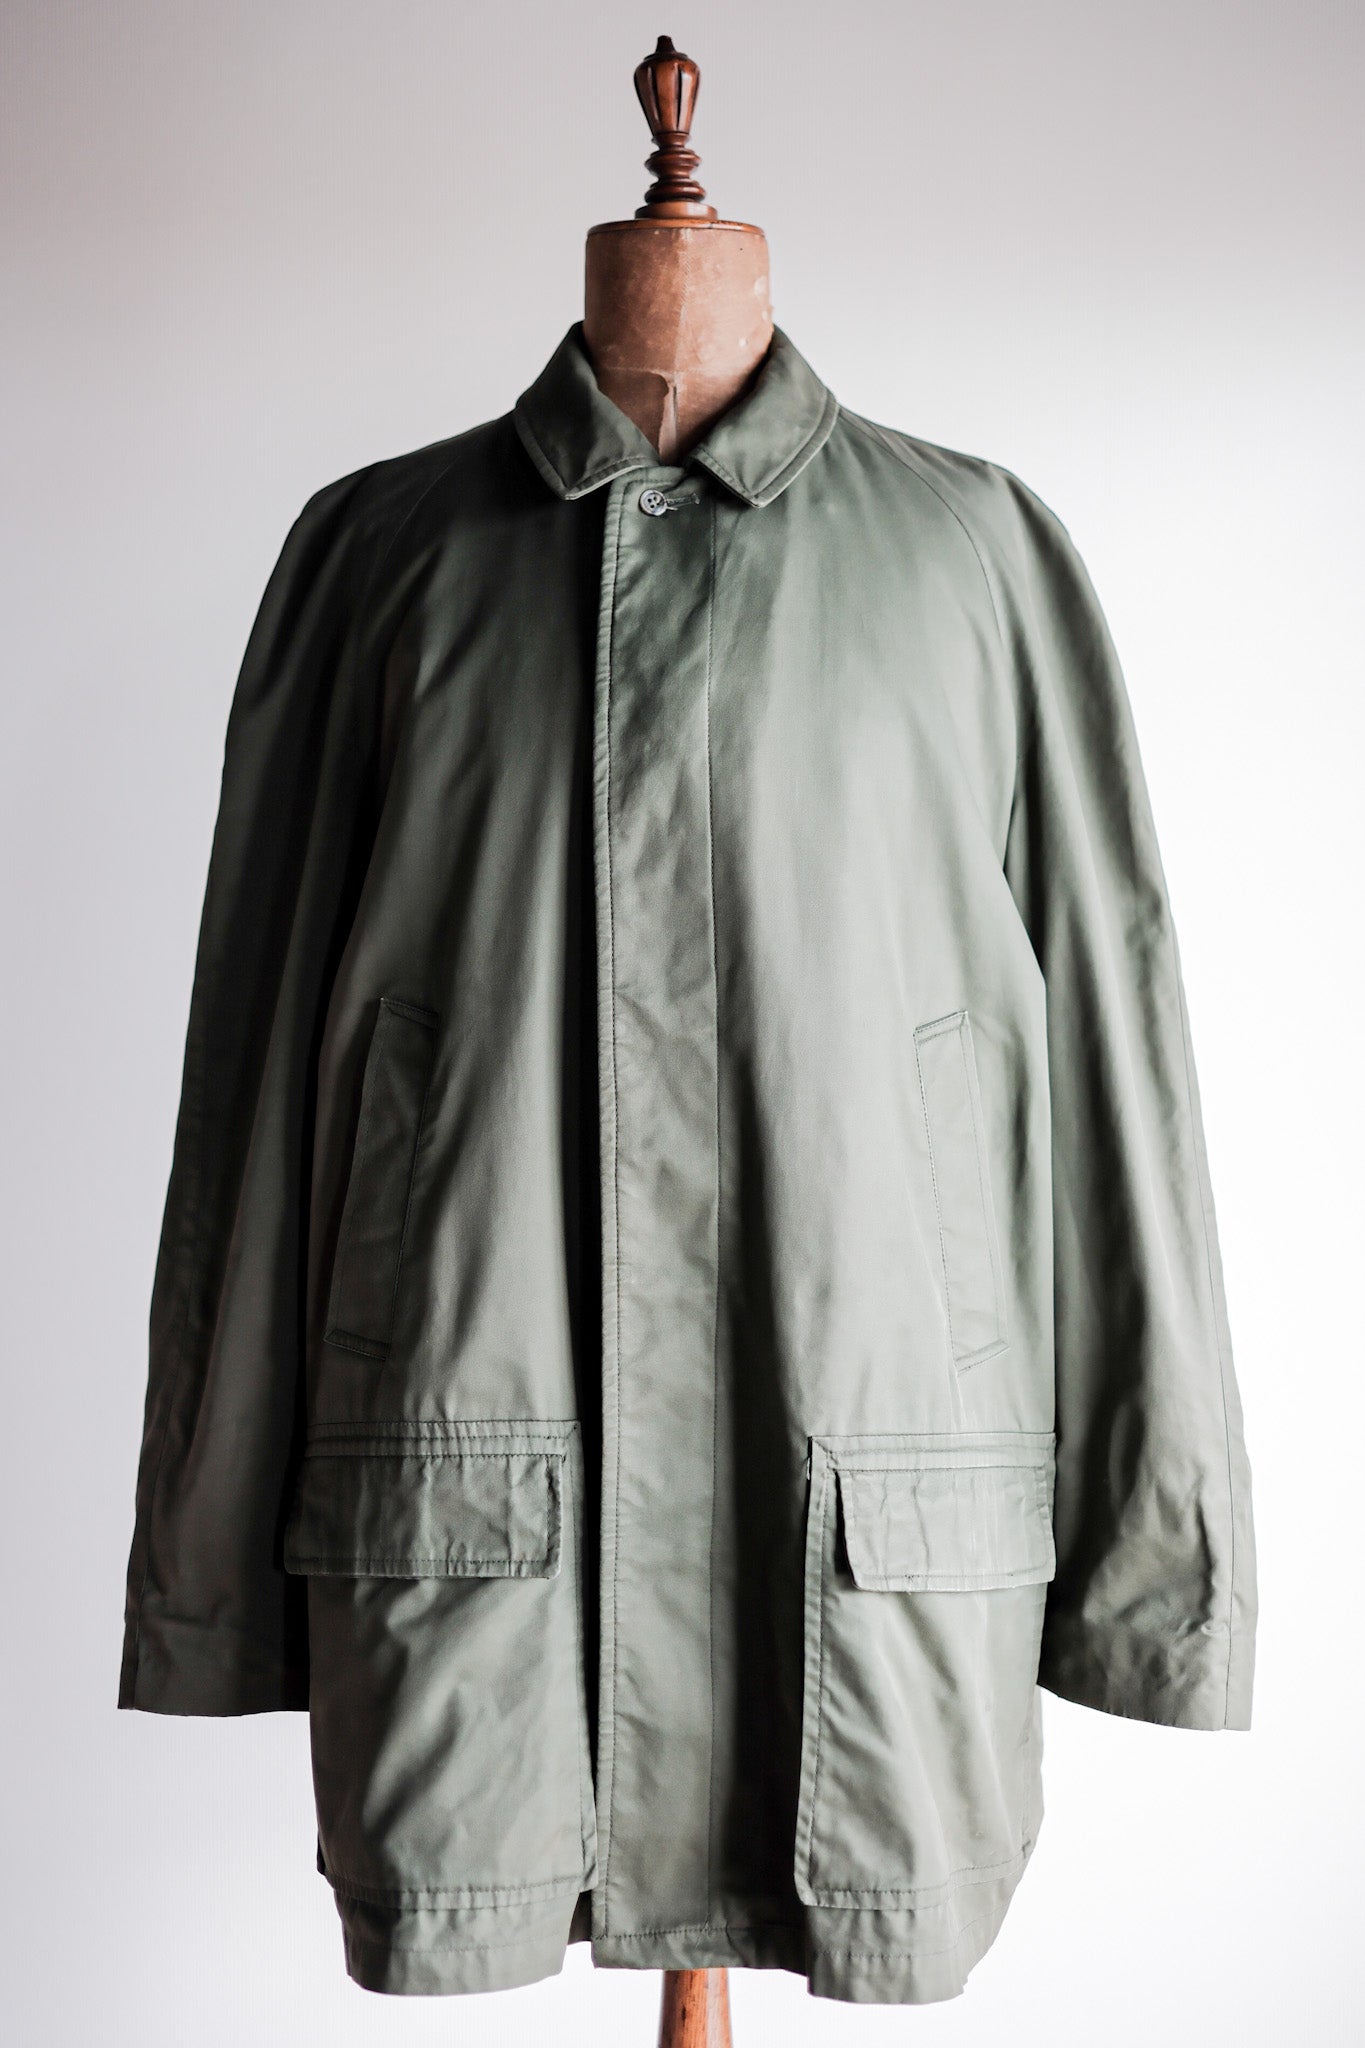 [~ 60's] Vintage Grenfell Outdoor Half Coat "Mountain Tag" "JC.Cordings & Co.LTD Besides Note"